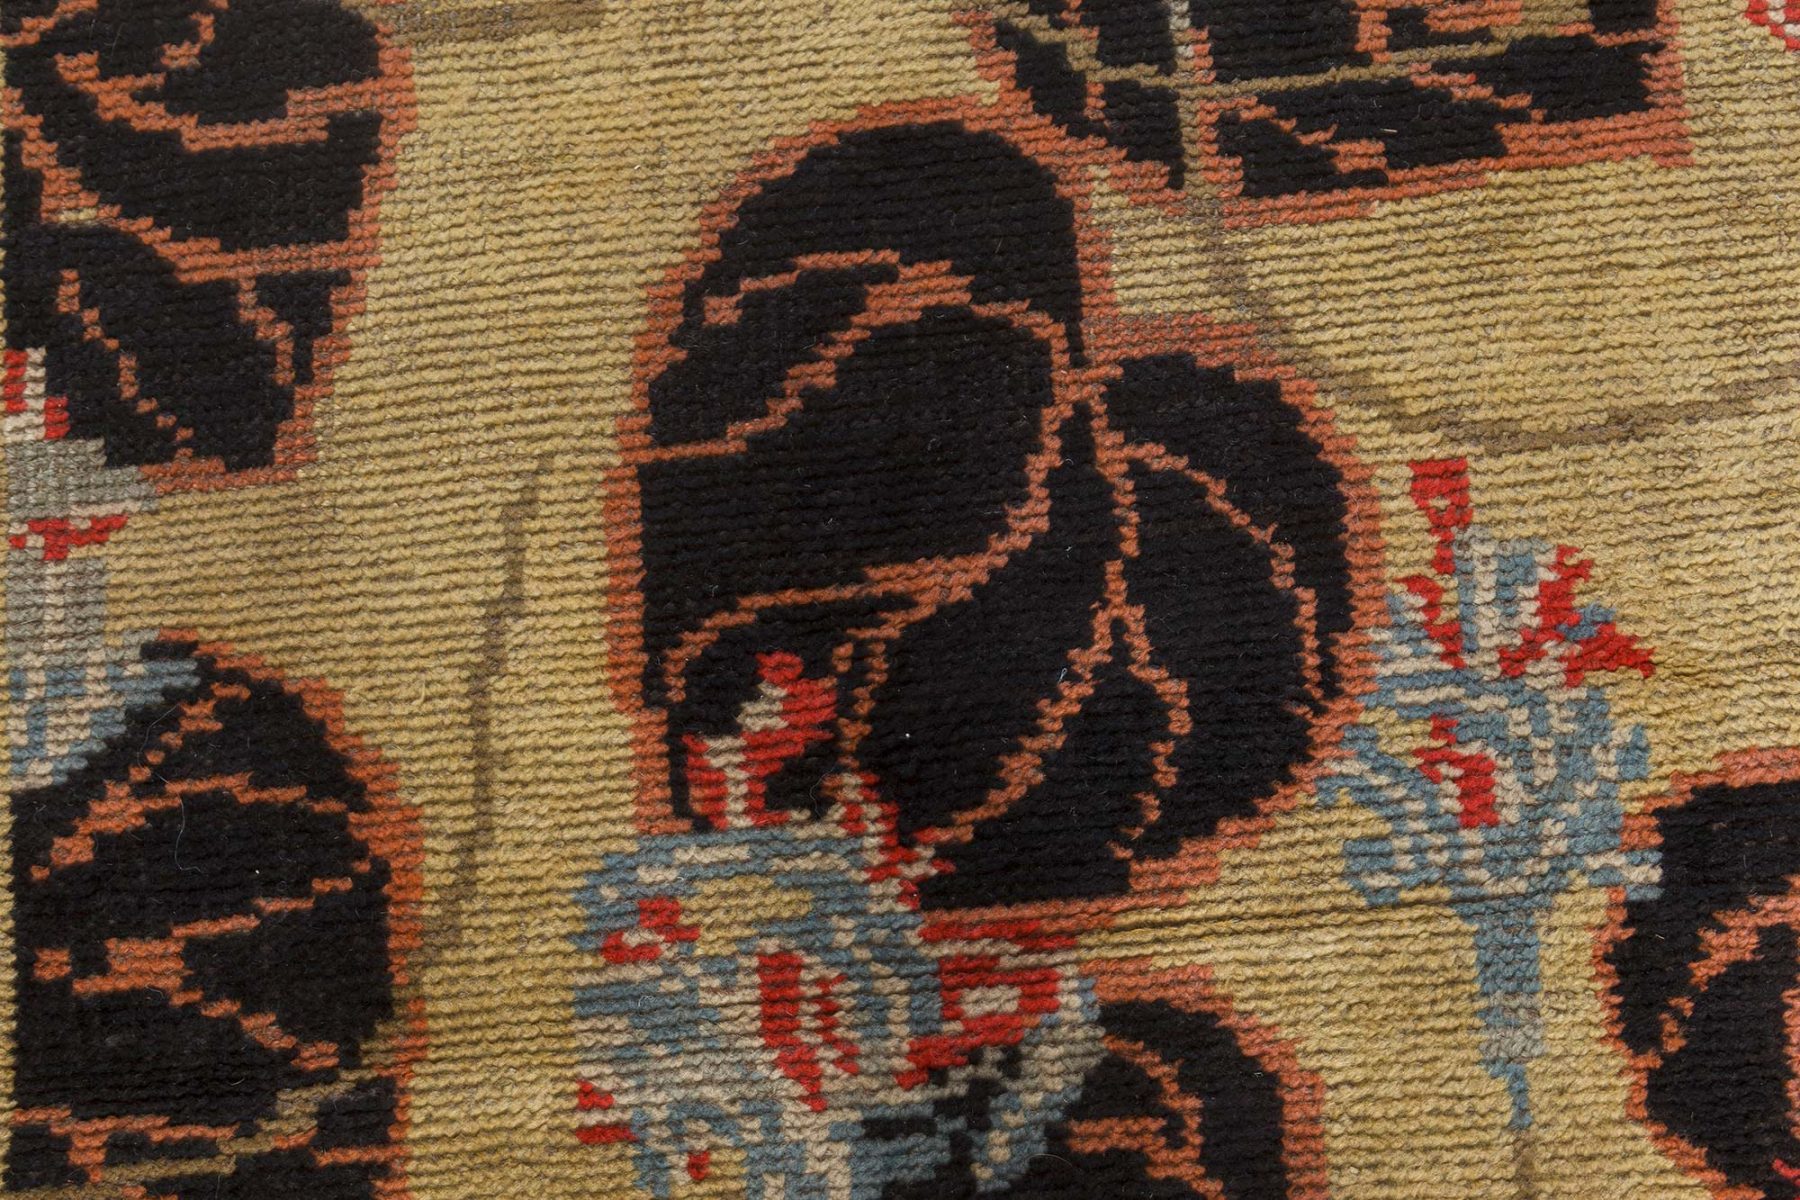 One-of-a-kind Vintage Irish Botanic Hand Knotted Wool Carpet BB7532 by DLB